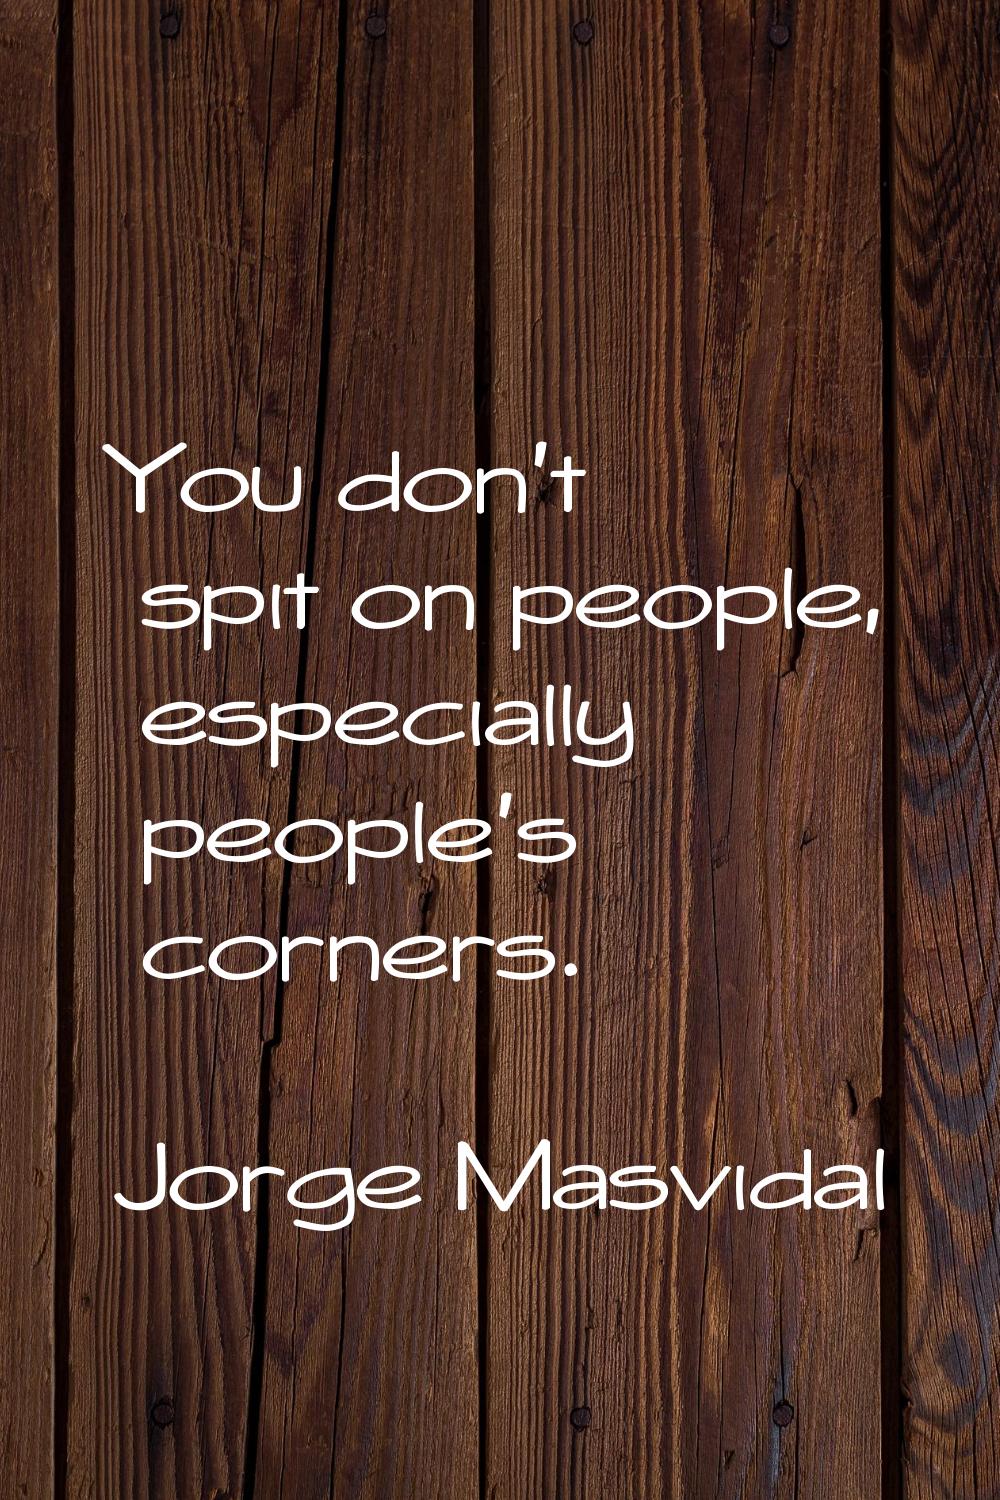 You don't spit on people, especially people's corners.